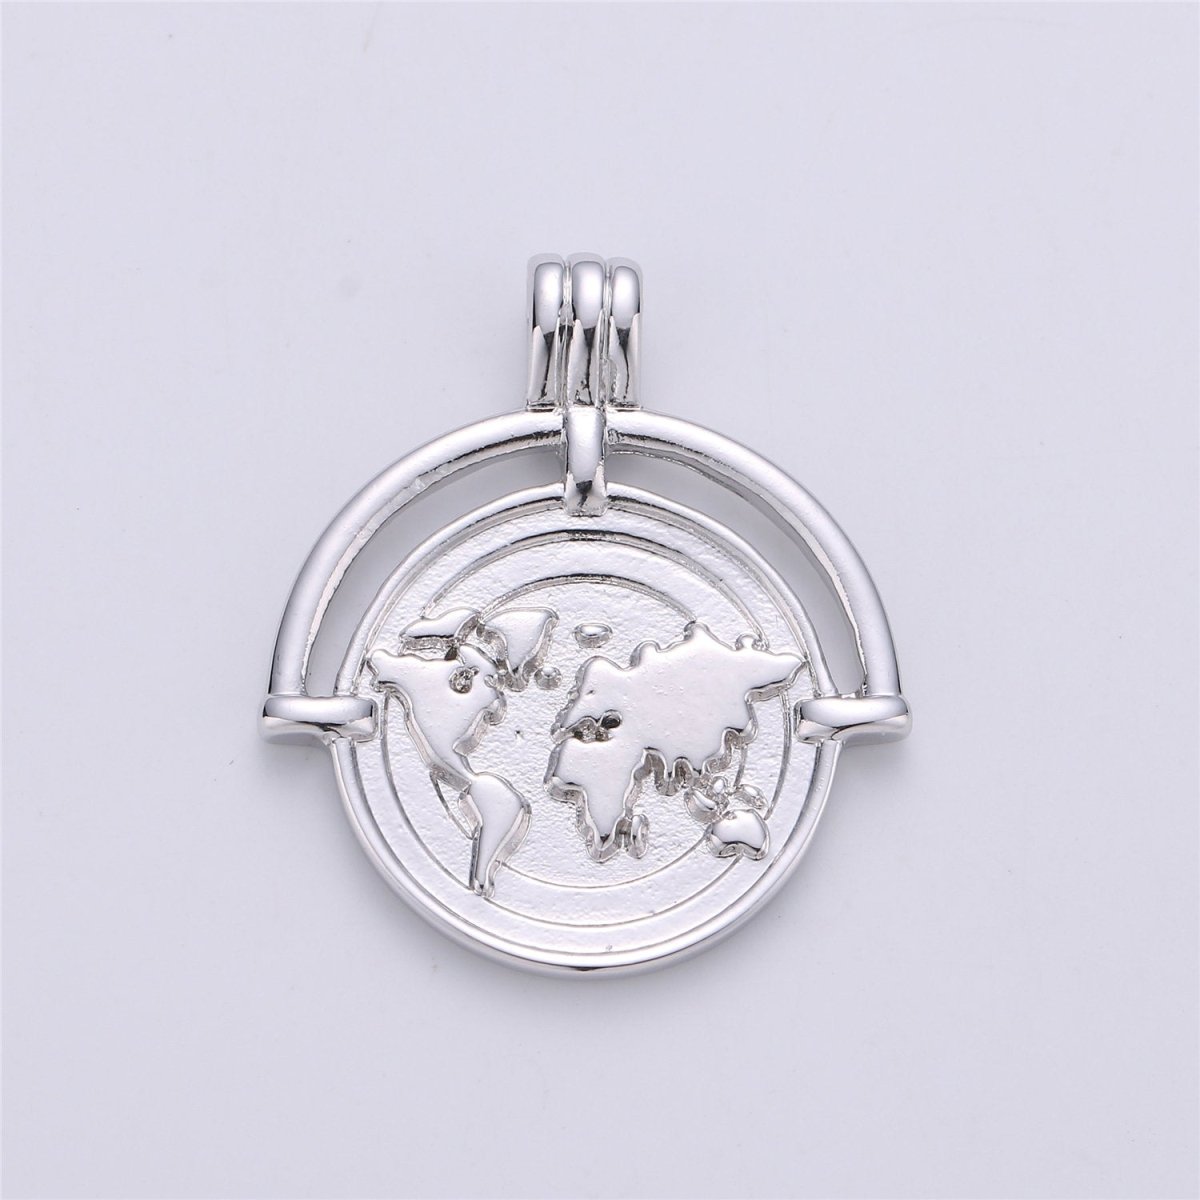 World Traveller Charm, 14K Gold Filled / White Gold Pendant Round Earth Globe Travel Vacay Coin Medallion Necklace Charm for Jewelry Making C-347 E-279 - DLUXCA